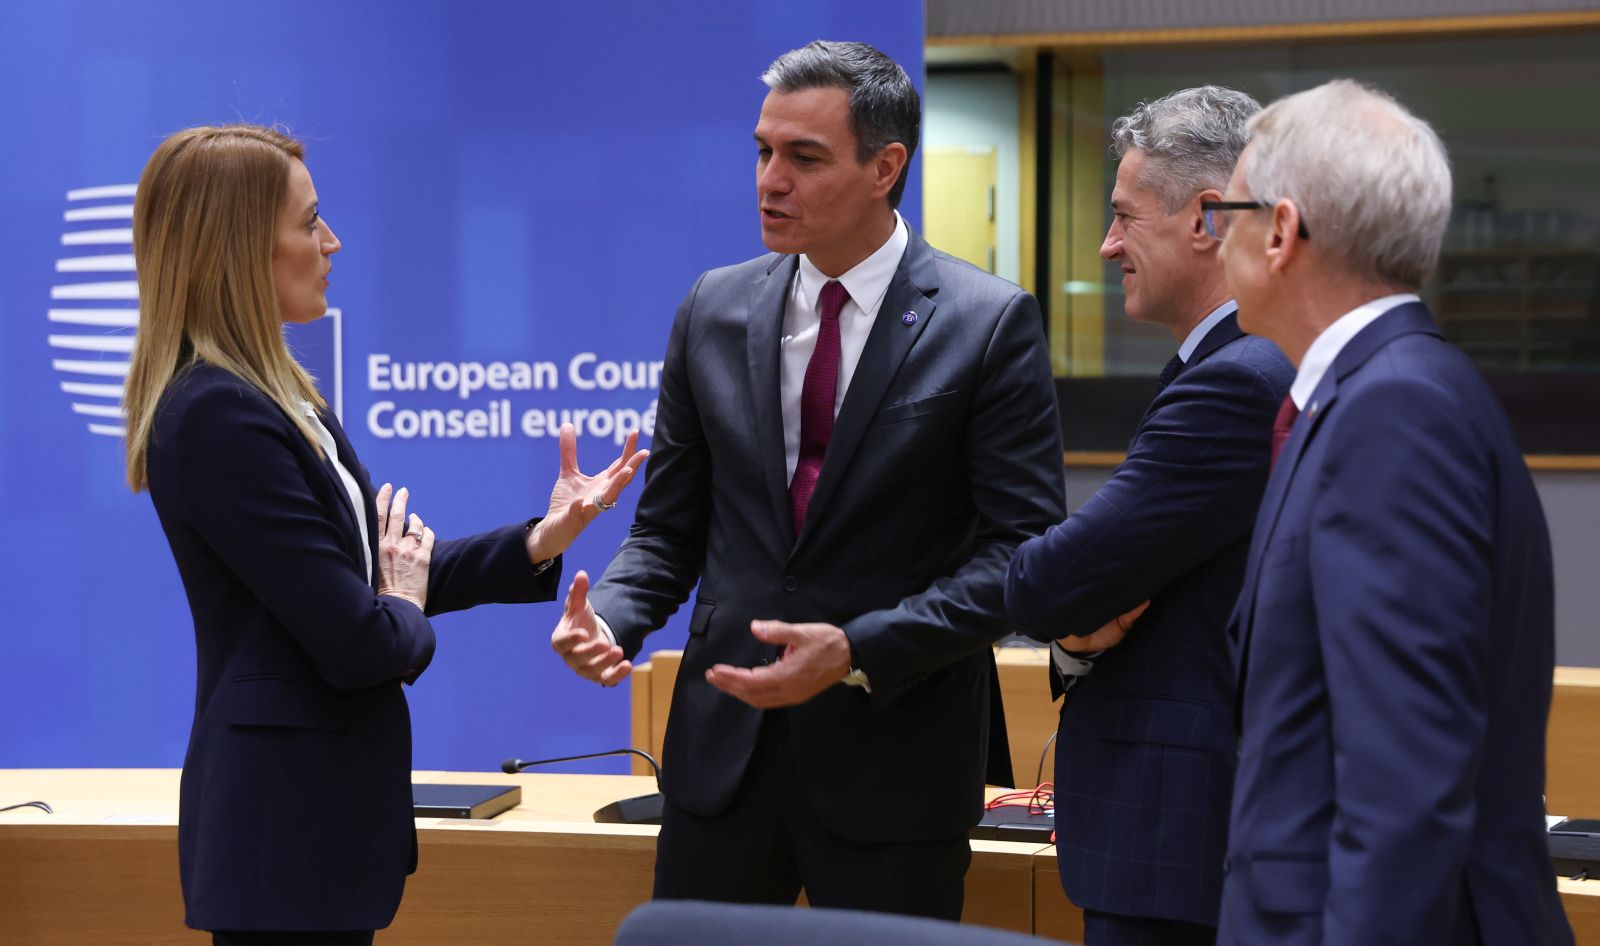 epa10940449 (L-R) European Parliament President Roberta Metsola, Spain's Prime Minister Pedro Sanchez, Slovenian Prime Minister Robert Golob and Bulgarian Prime minister Nikolai Denkov during the European Council meeting in Brussels, Belgium, 26 October 2023. In a two-day summit on 26-27 October, EU leaders are expected to address the situation in the Middle-East and Ukraine, as well as the EU's long-term budget, migration, and external relations.  EPA/OLIVIER HOSLET